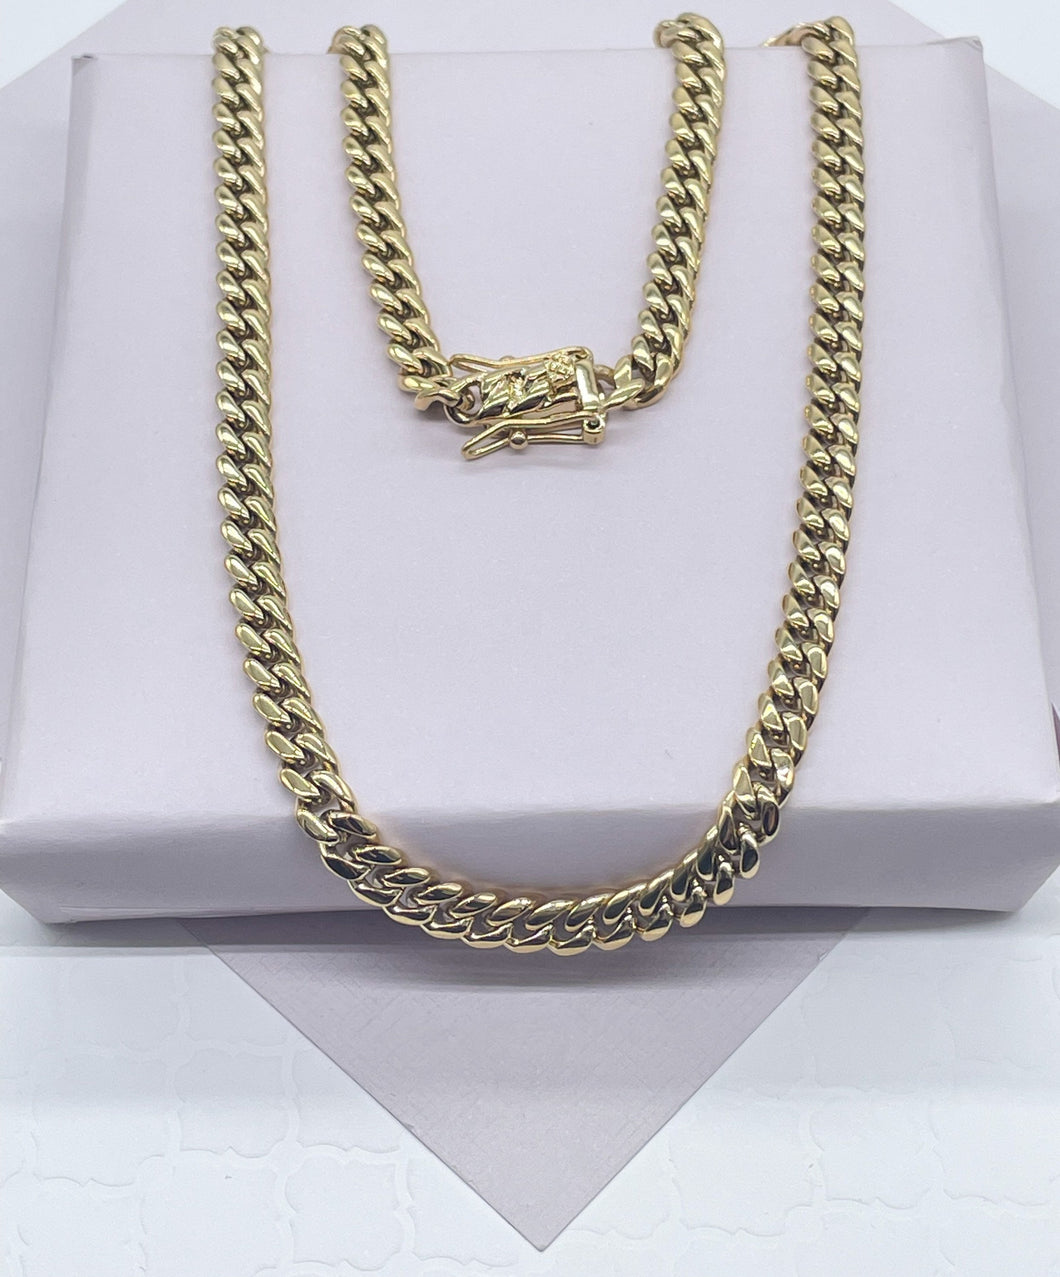 14k Gold Filled 6mm Thick Cuban Curb Link Chain Necklace Featuring Special Large Safety Clasp